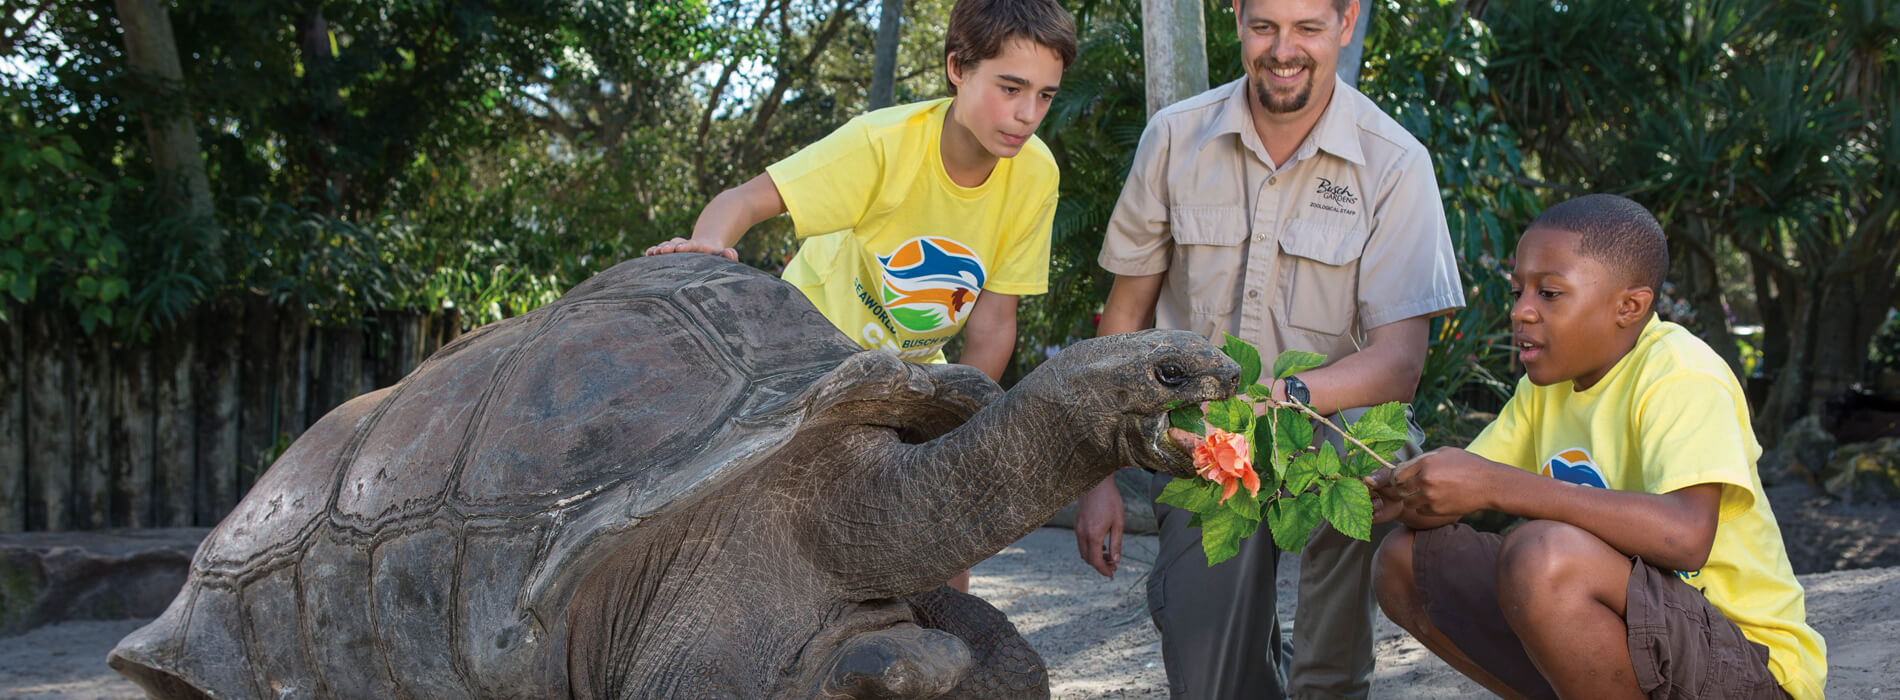 A male host wearing brown clothes and two boys wearing yellow t-shirts feed a large Aldabra tortoise plants at Busch Gardens Tampa Bay animal theme park, located in Florida